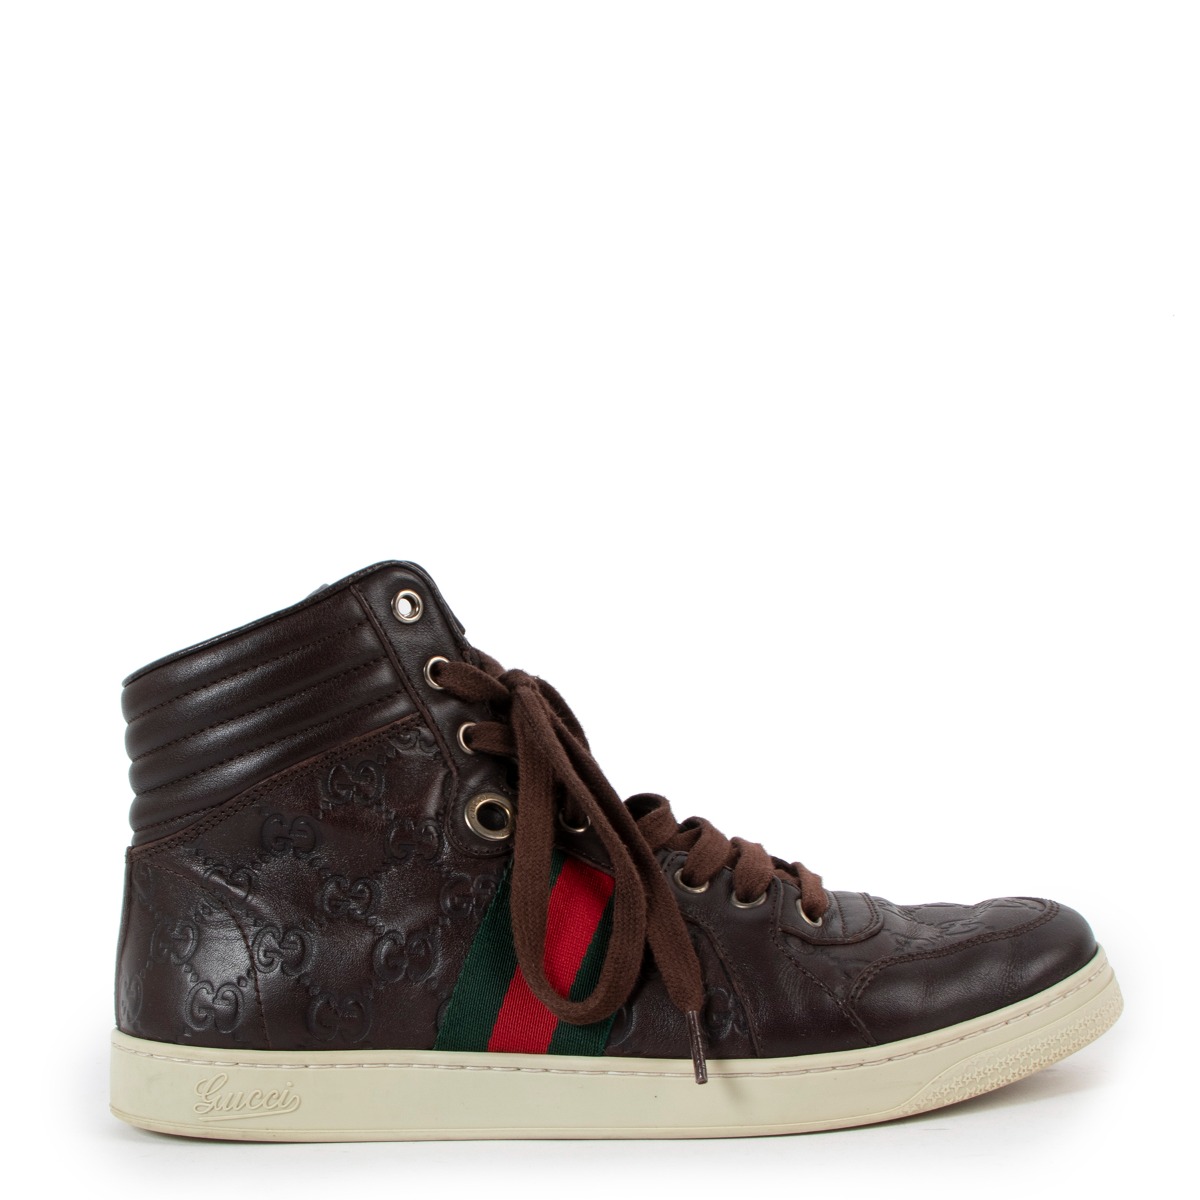 Gucci Brown Guccissima Leather Web Detail High Top Sneakers Size 40